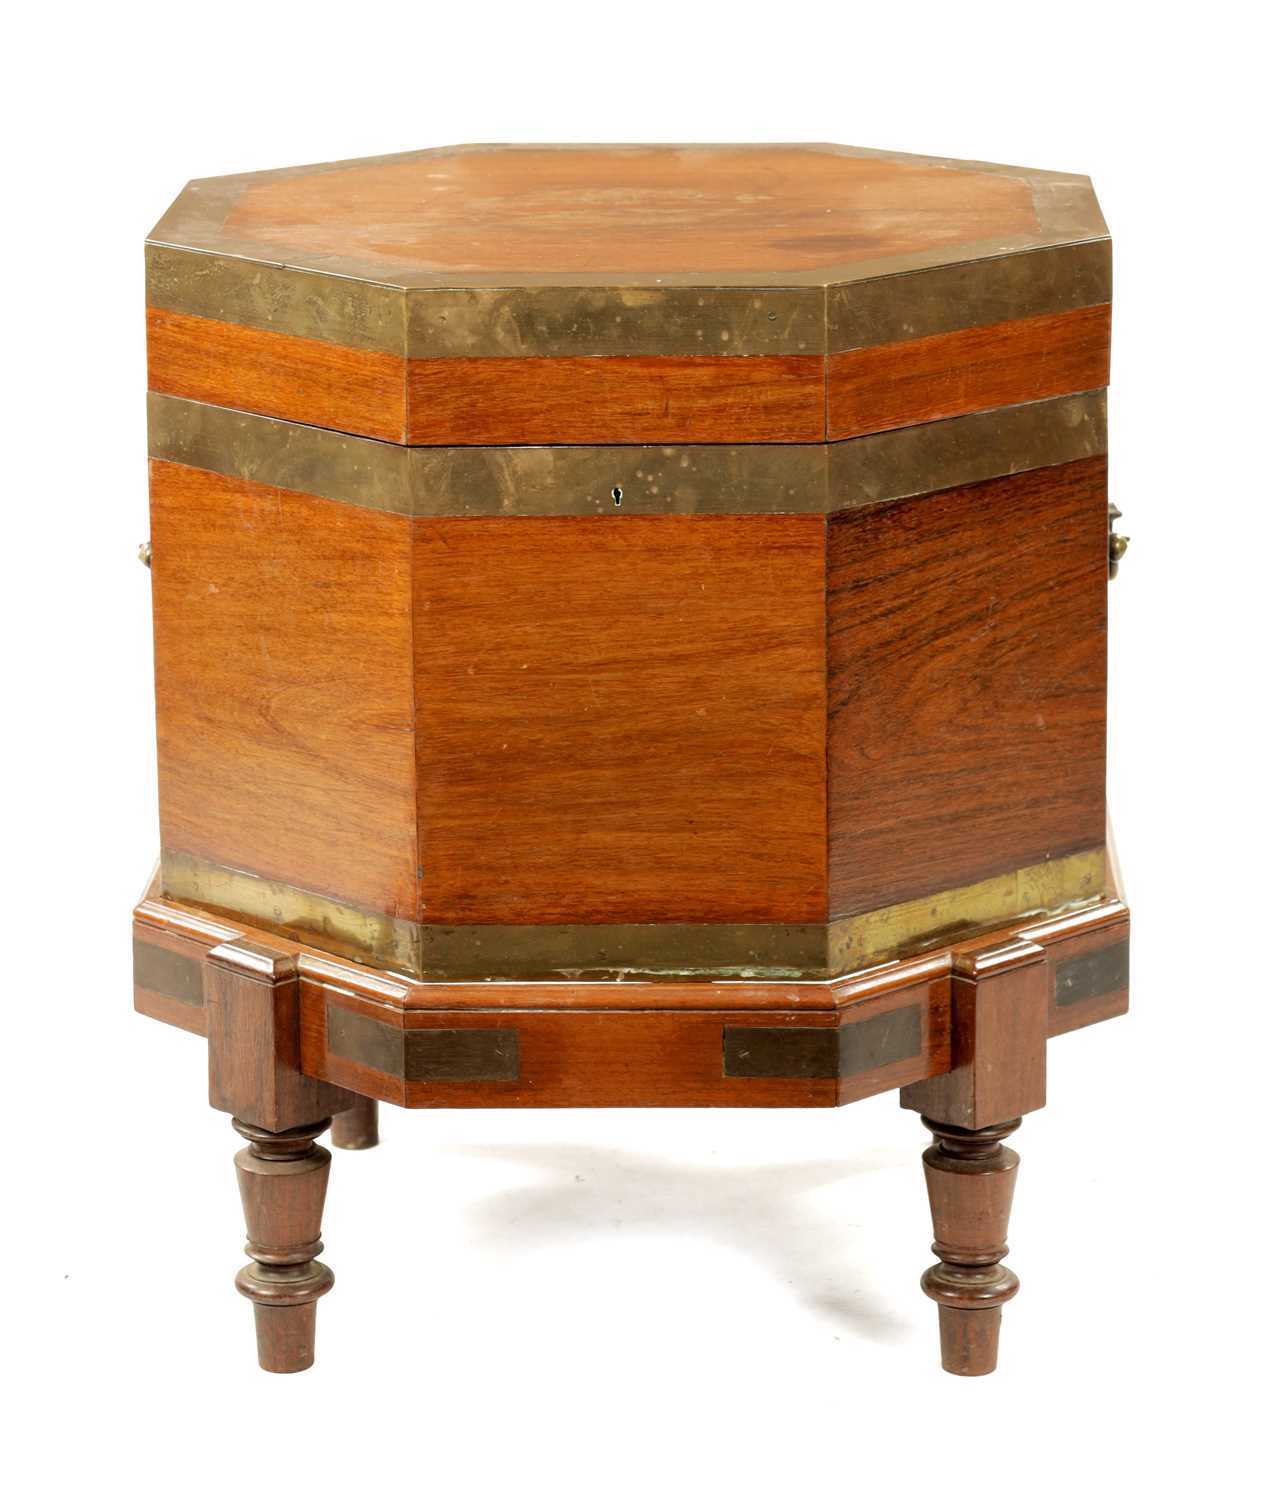 AN UNUSUAL 18TH CENTURY COLONIAL PADOUK OCTAGONAL SHAPED WINE COOLER ON STAND